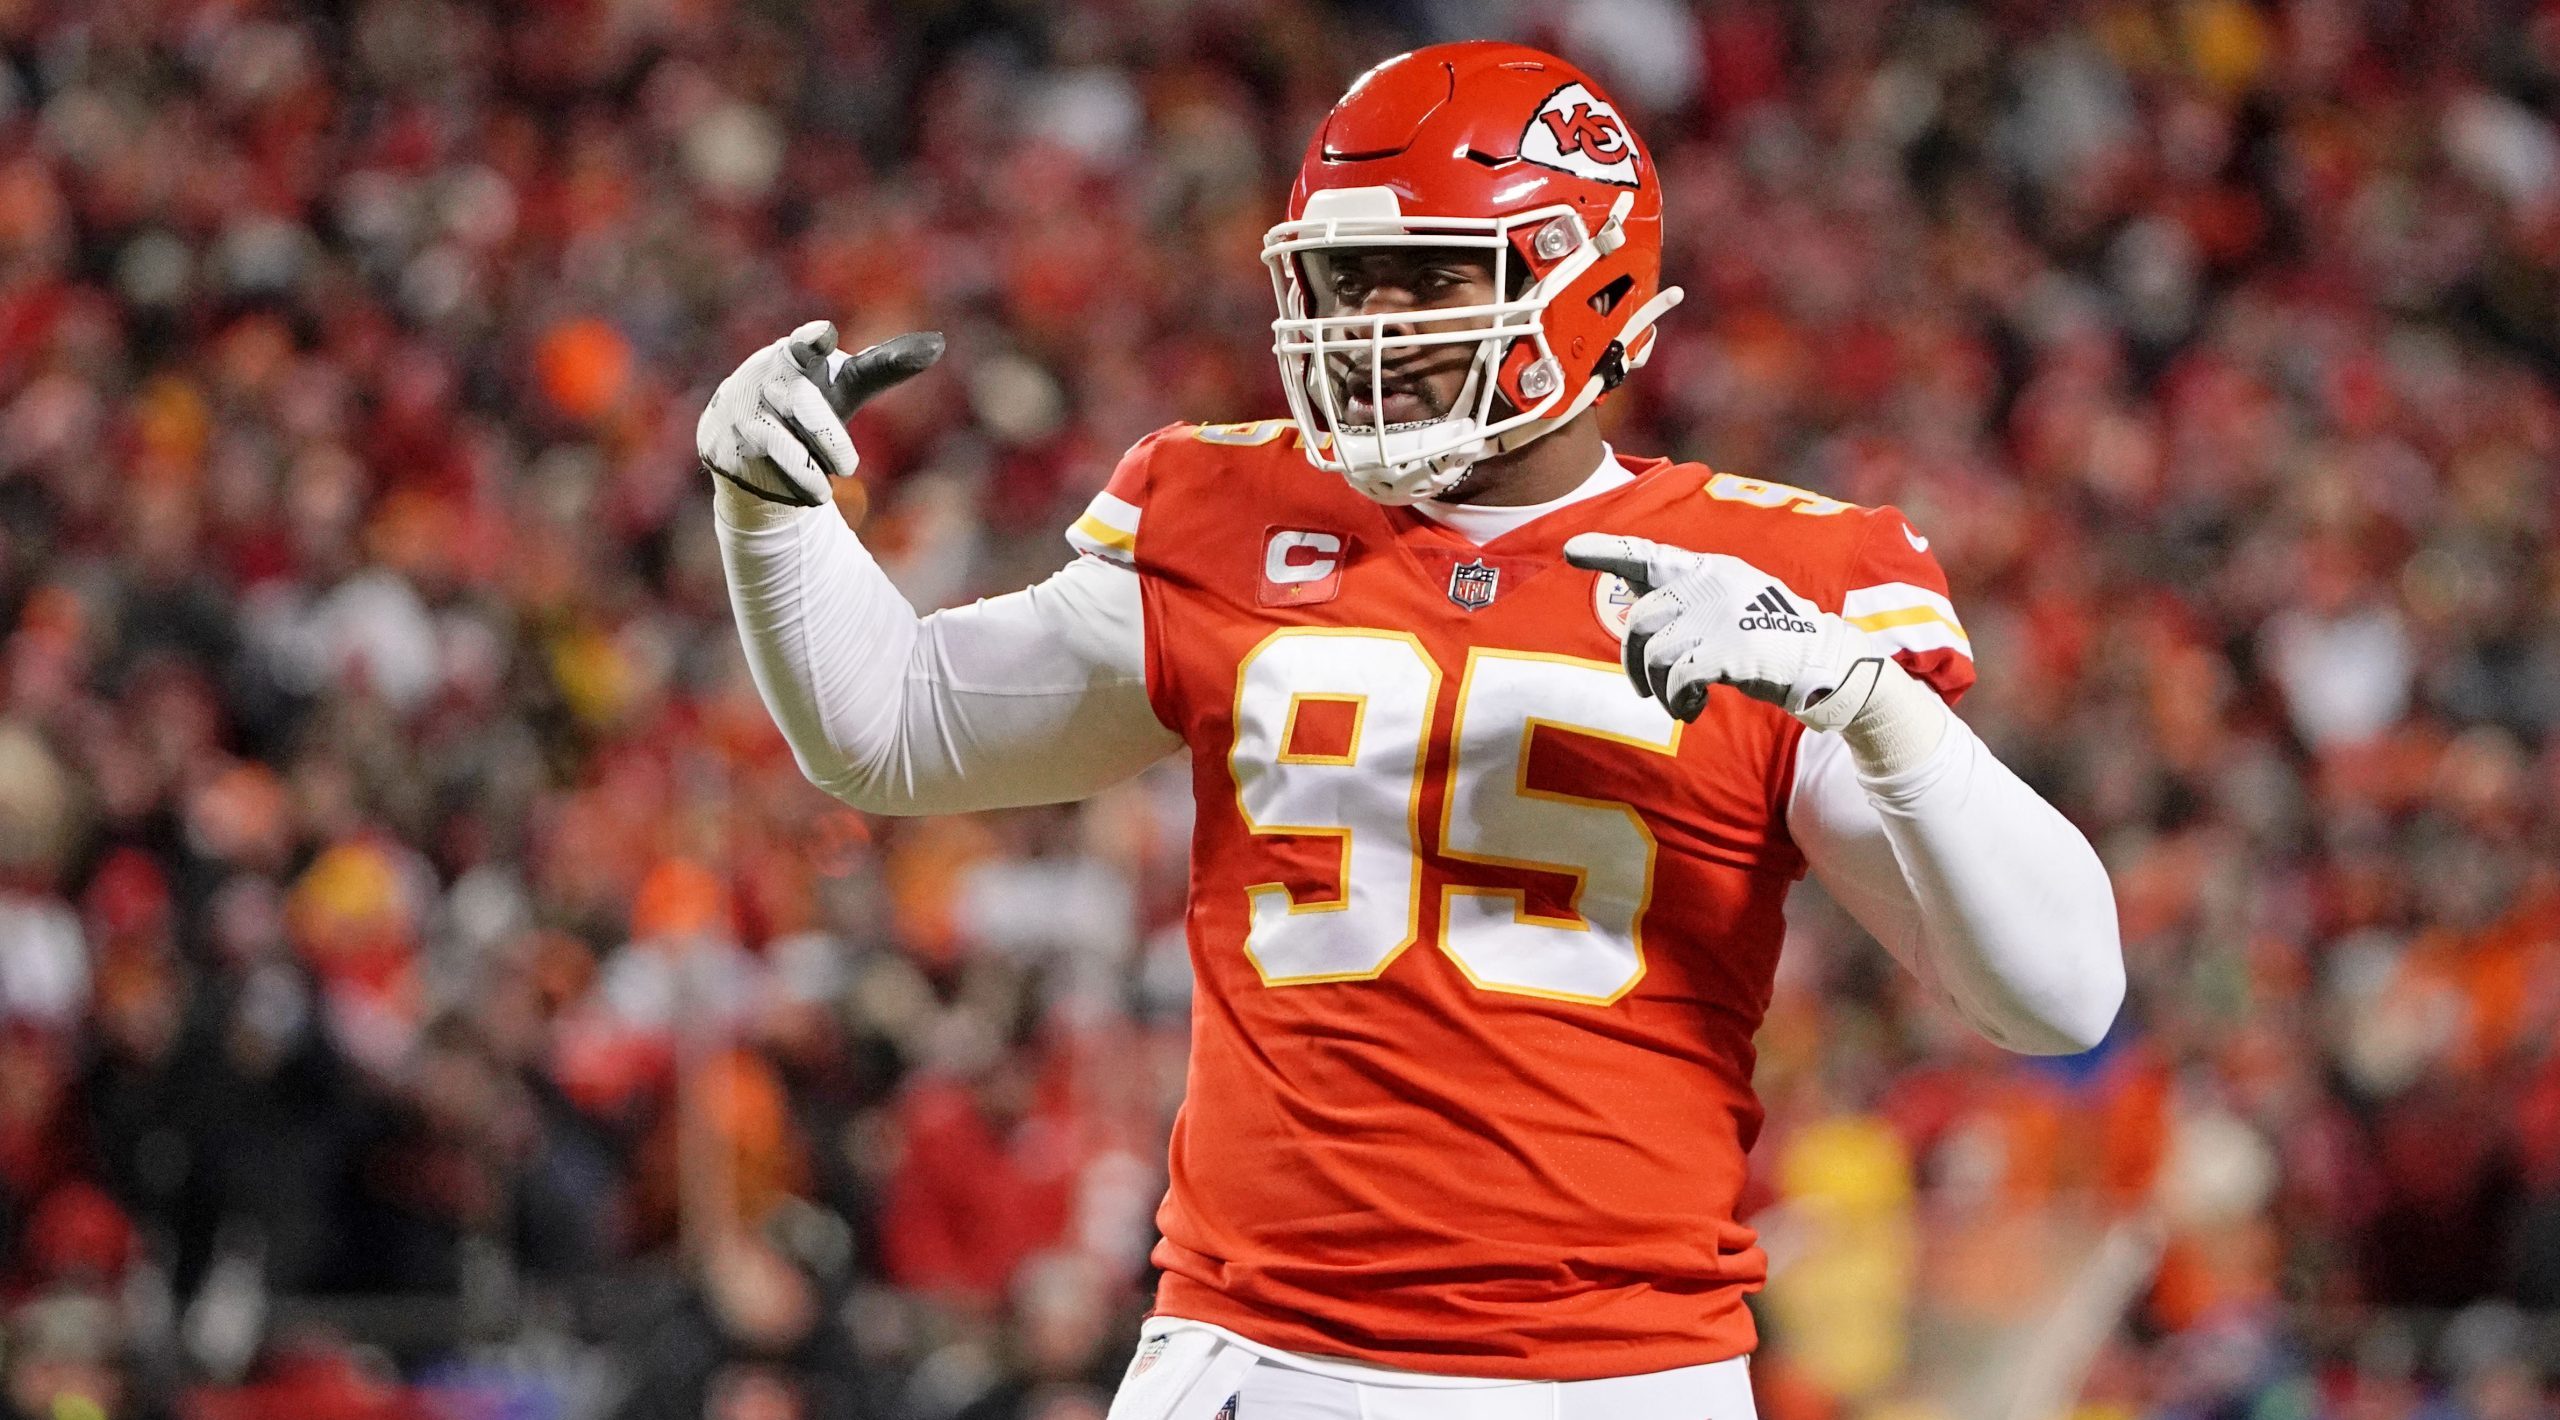 Chris Jones didn't play on Thursday, still in a holdout with the Chiefs. Still, the NFL world felt he had a good night. Photo Credit: Denny Medley-USA TODAY Sports